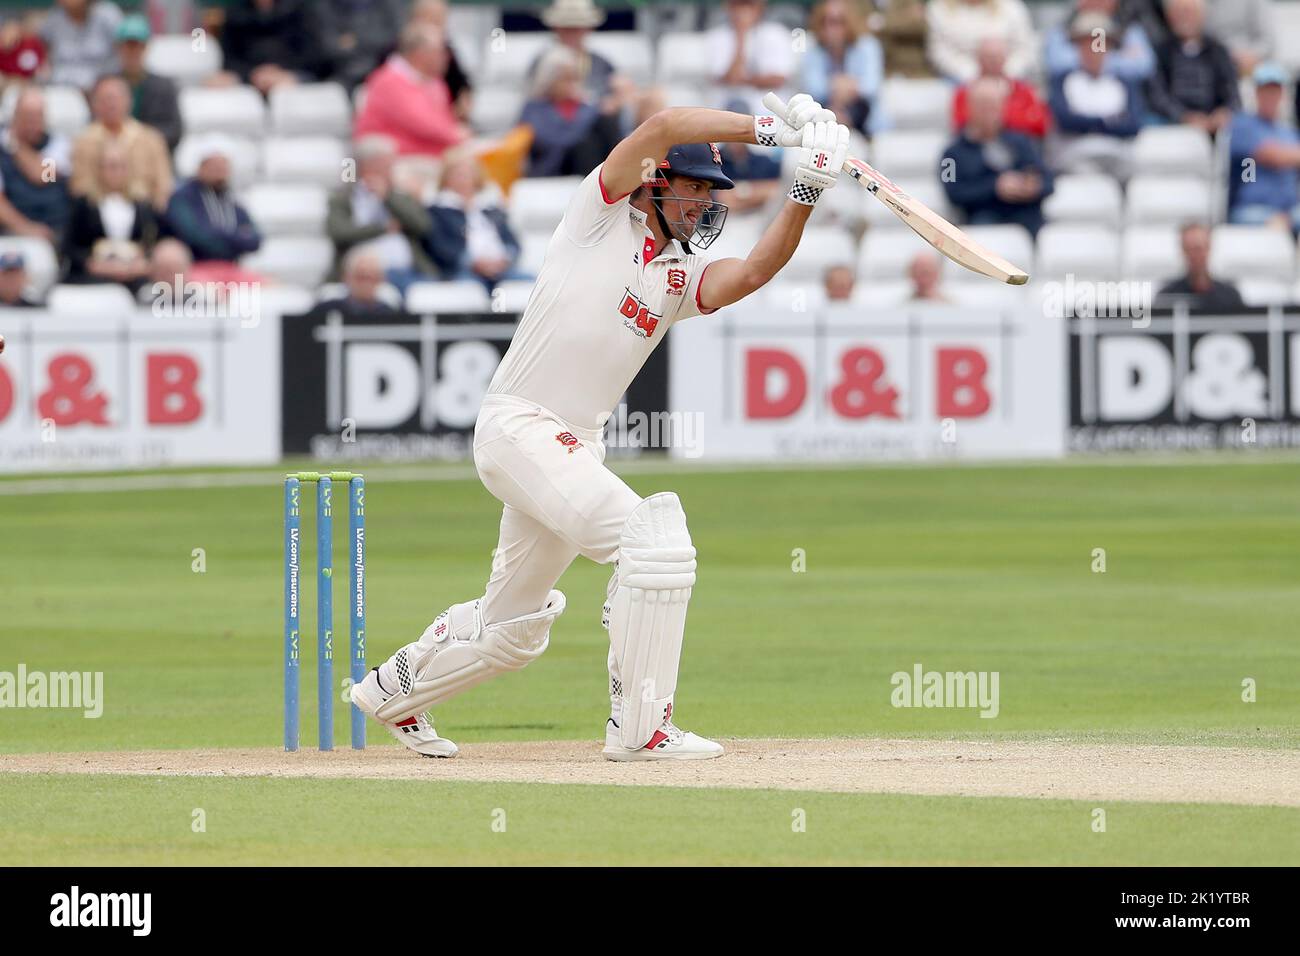 Sir Alastair Cook of Essex in batting action during Essex CCC vs Lancashire CCC, LV Insurance County Championship Division 1 Cricket at The Cloud Coun Stock Photo